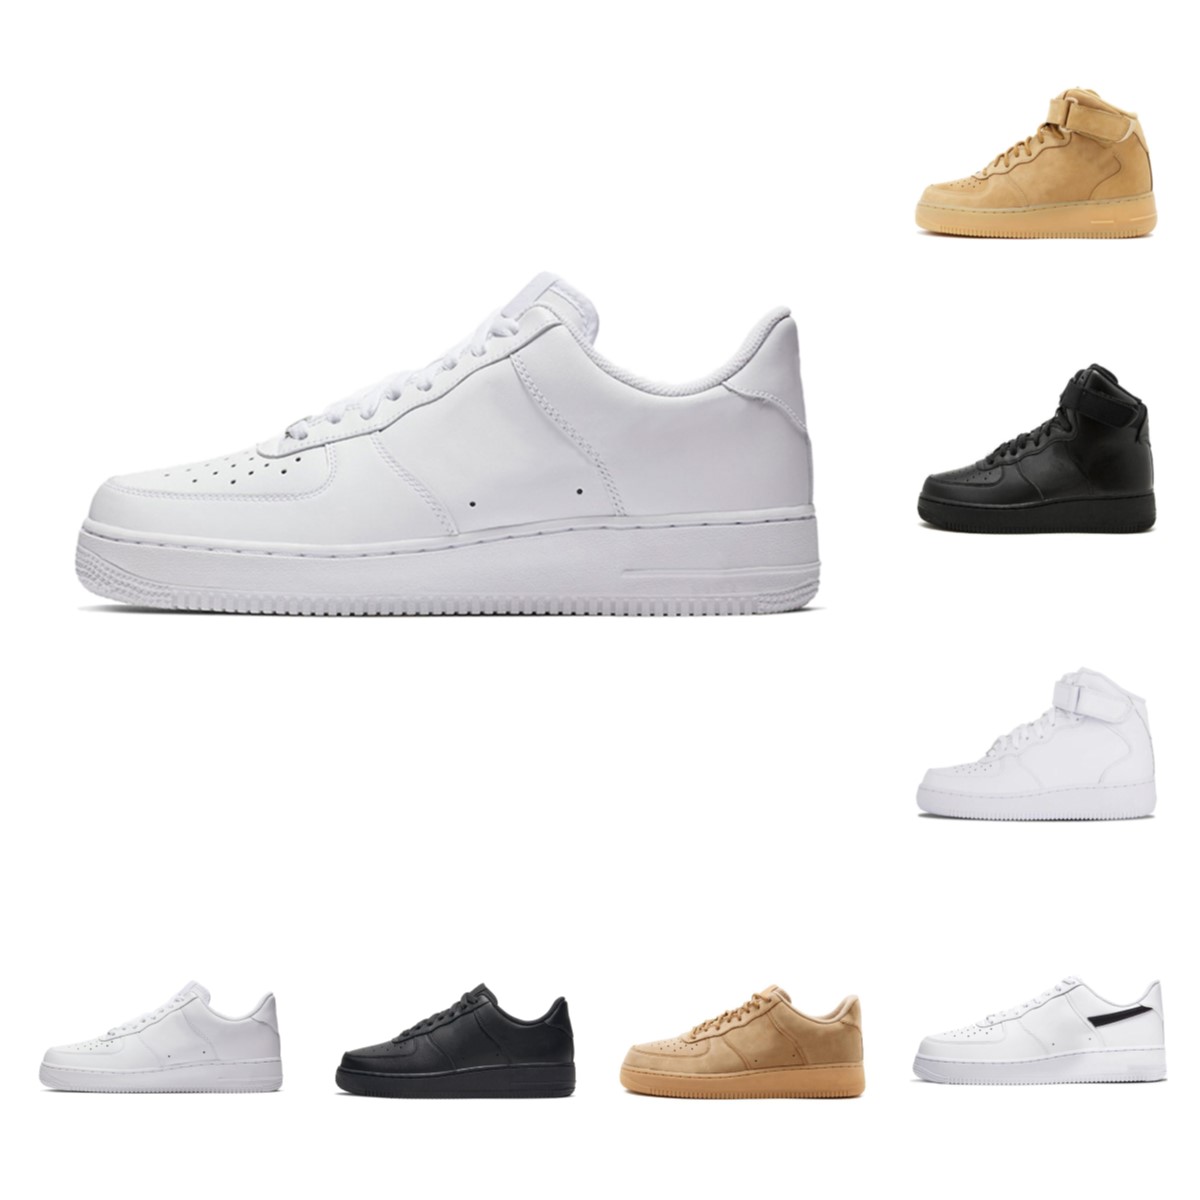 Quality 2022 NewFORCes Men Low Skateboard Shoes Discount One Unisex 1 07 Knit Euro Airs Wheat Women All White Black Designers Outdoor Sports Sneakers